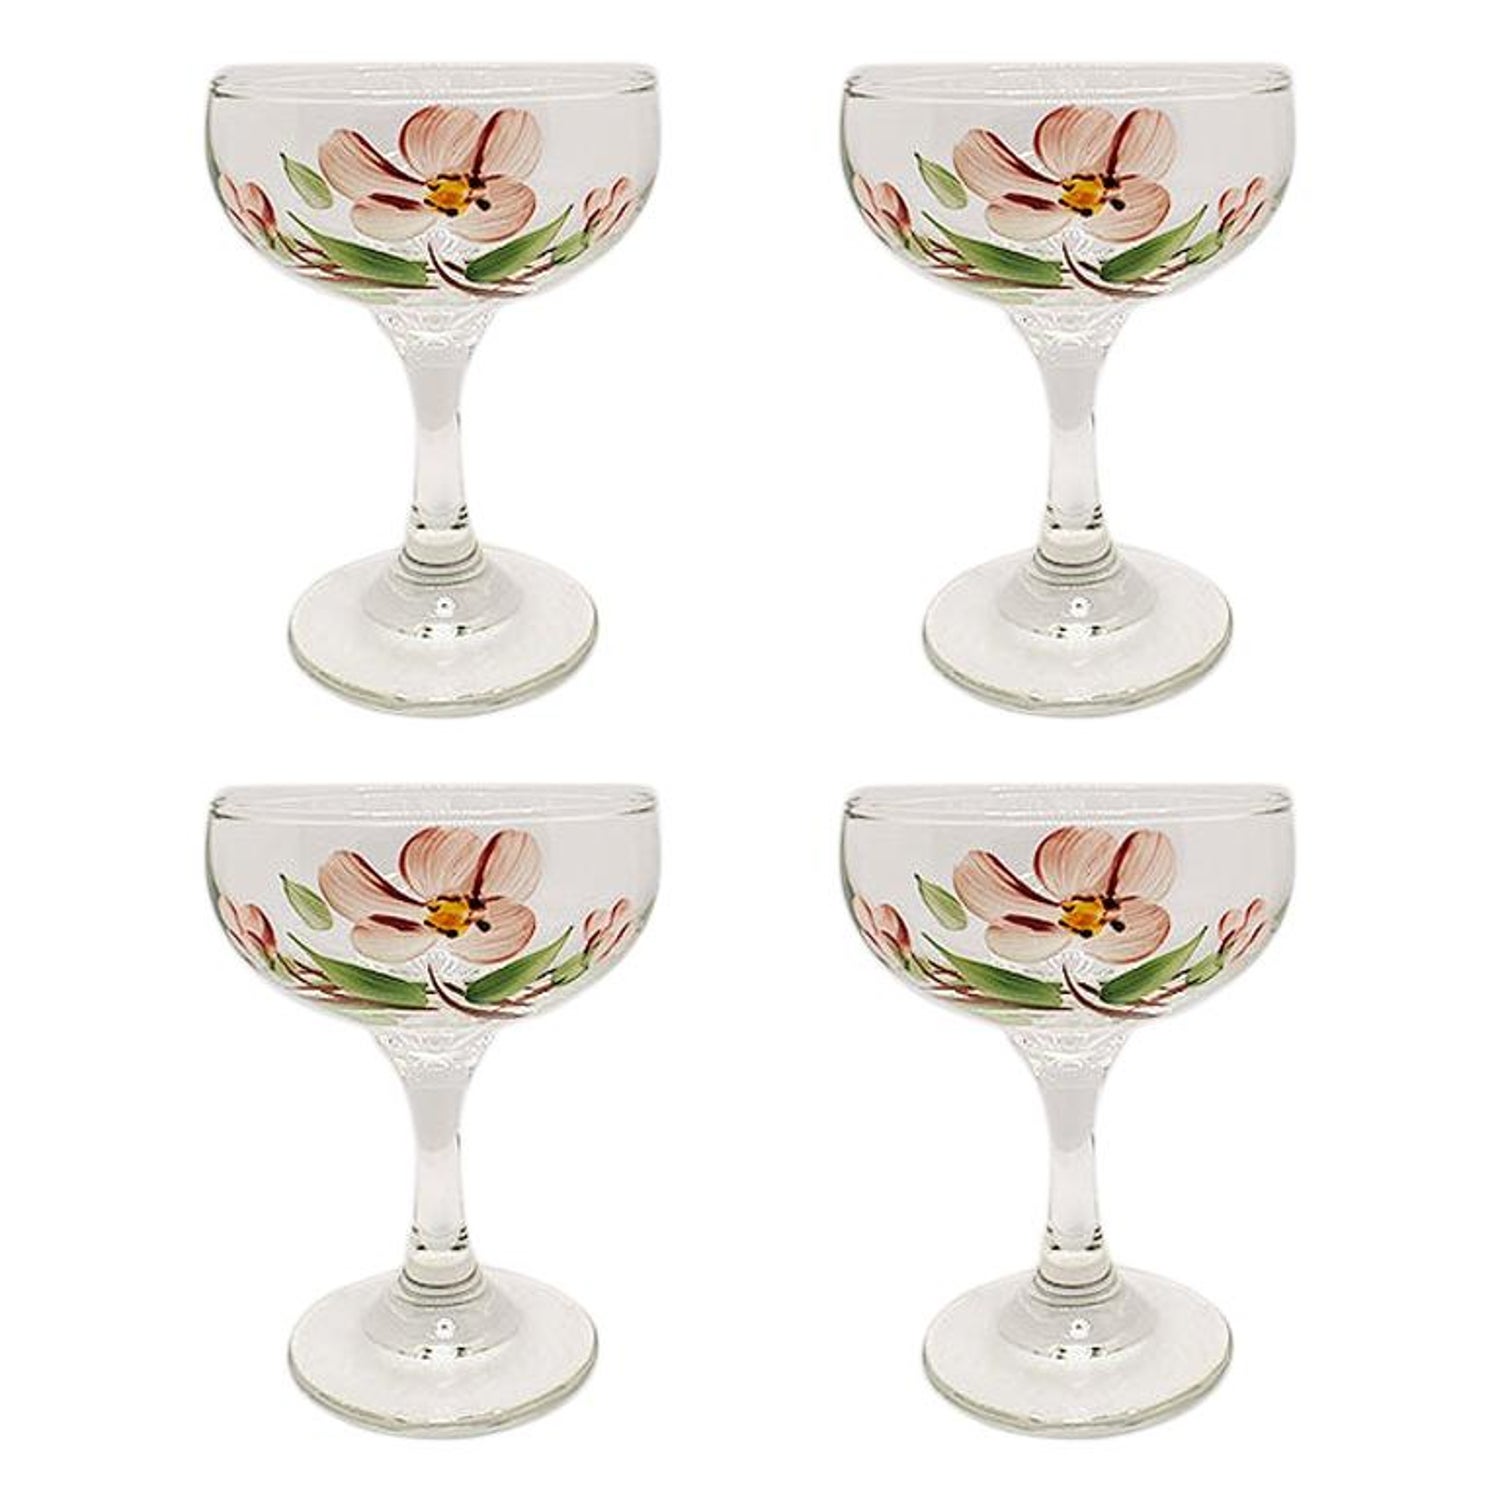 https://a.1stdibscdn.com/hand-painted-floral-motif-pink-and-green-champagne-coupe-glasses-set-of-4-for-sale/1121189/f_246674121627465026990/24667412_master.jpg?width=1500